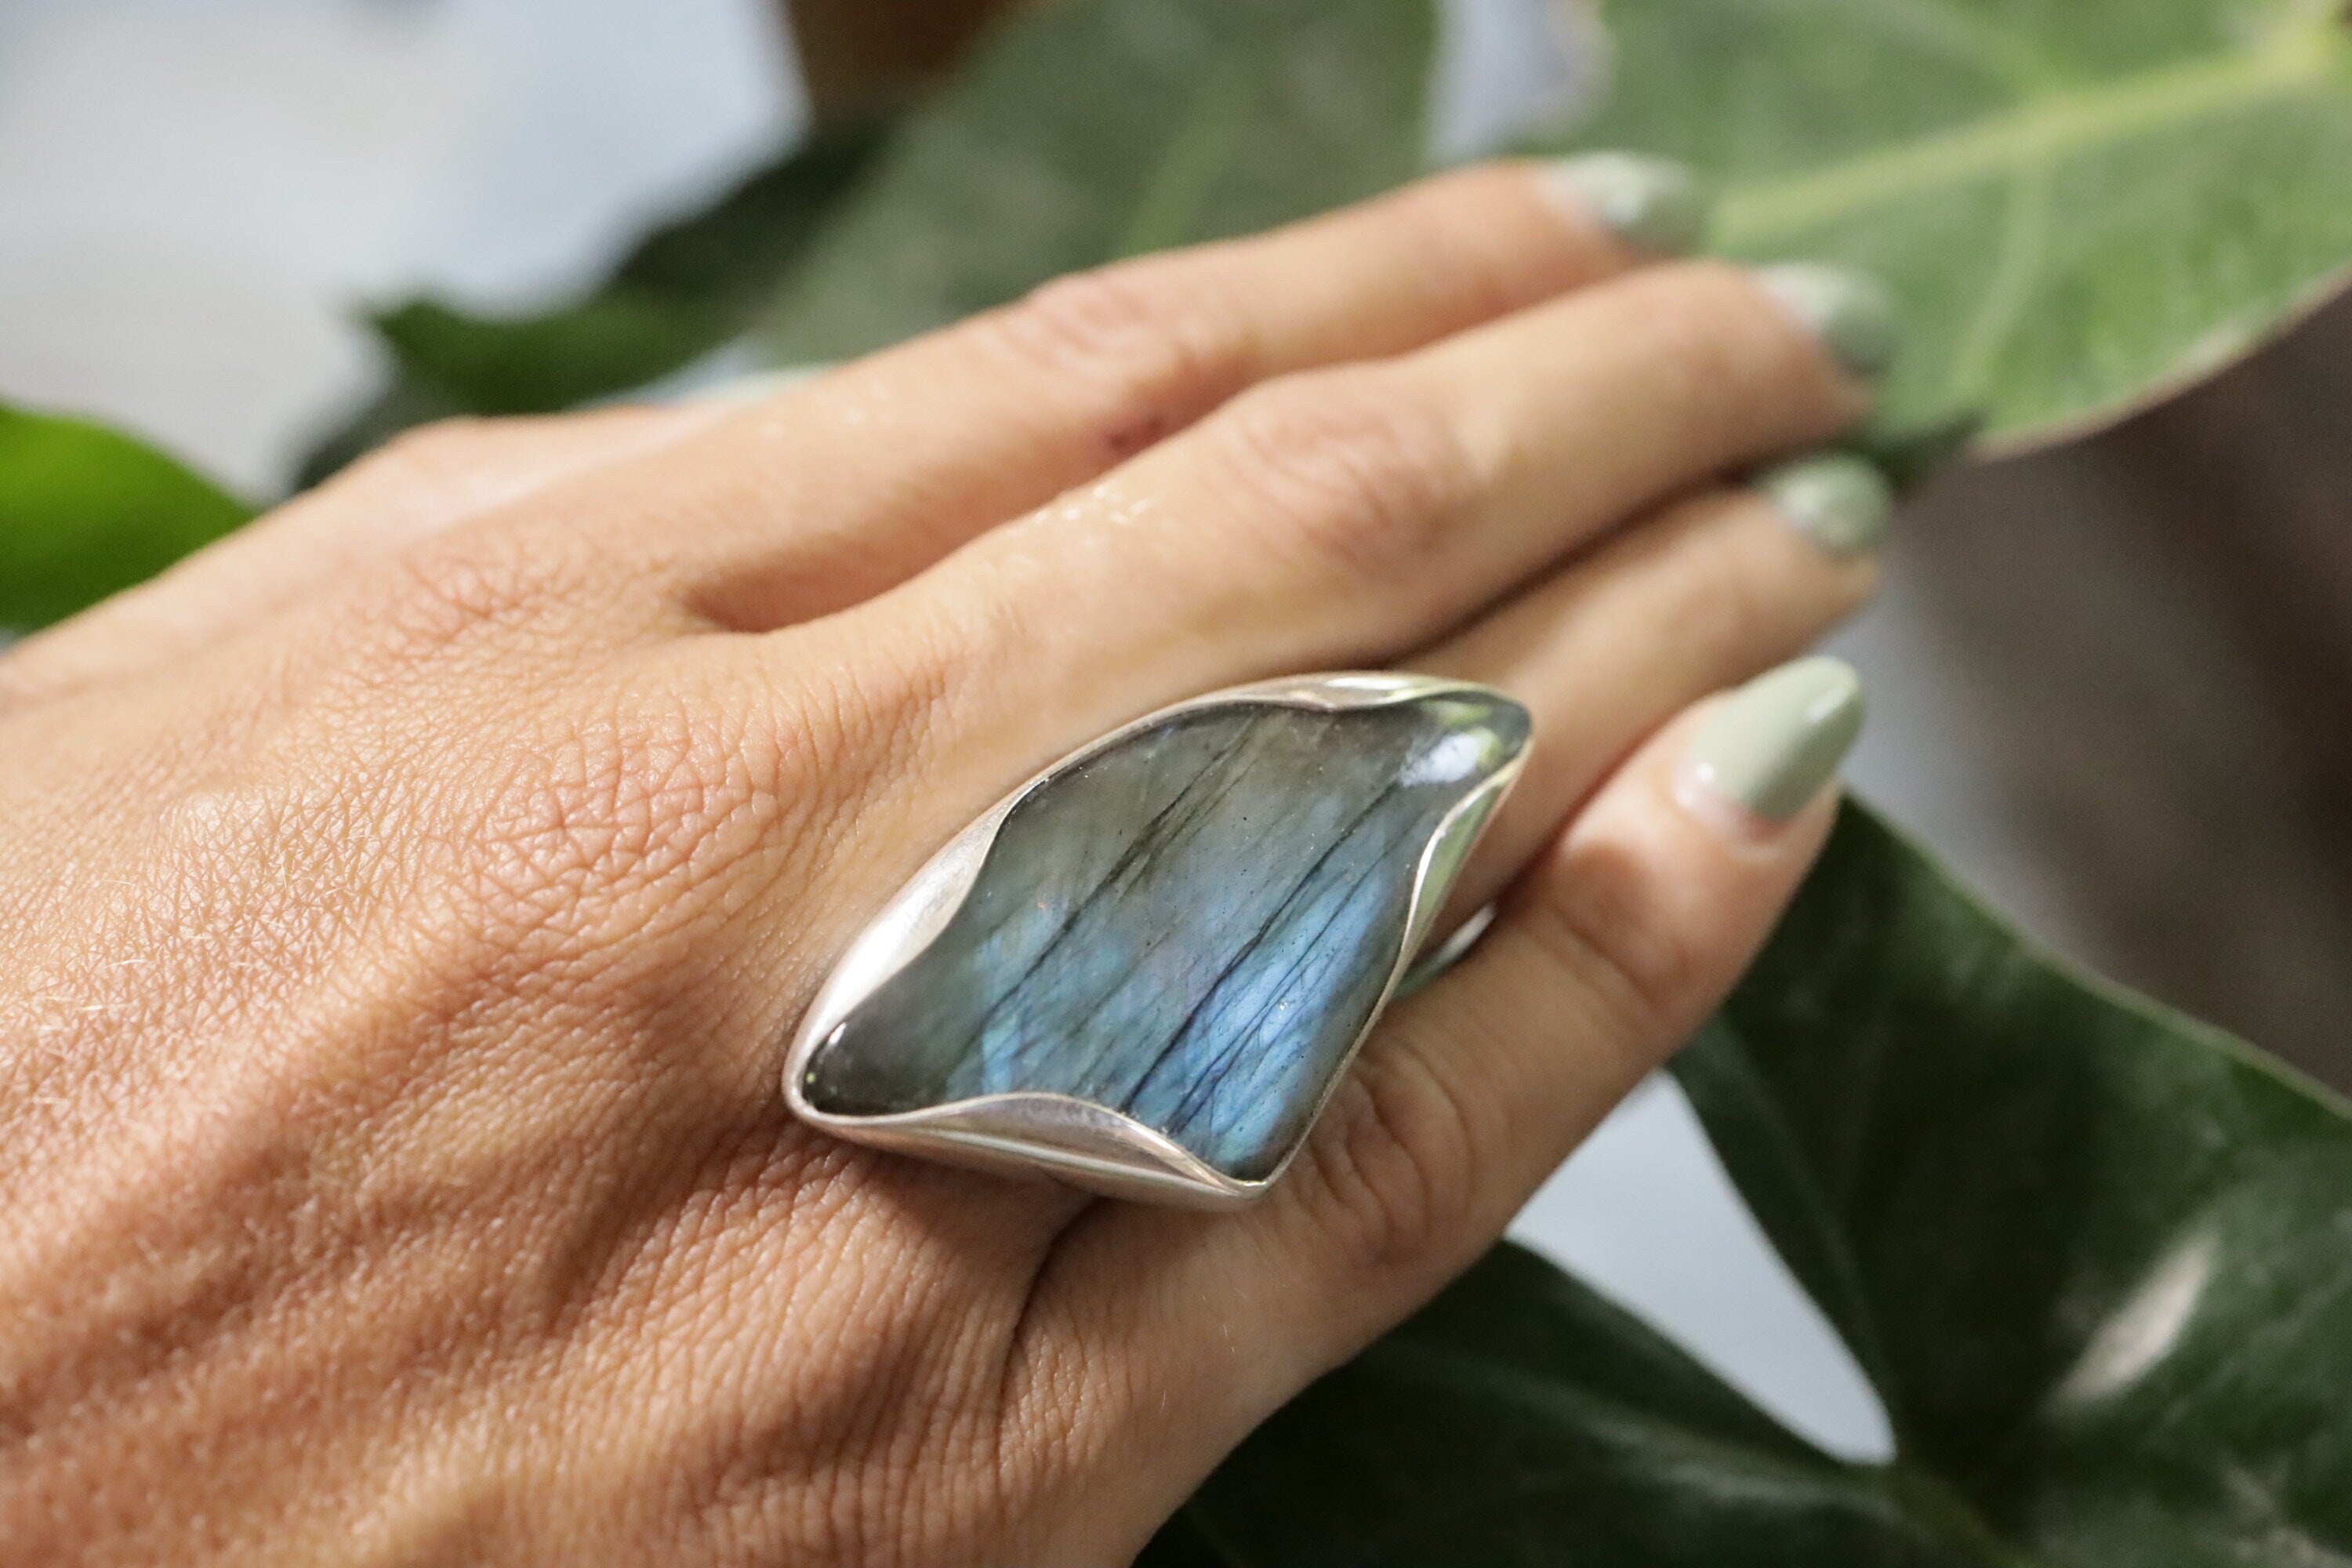 A Sturdy Embrace of Ancient Mystique: Adjustable Sterling Silver Ring with Tooth-Shaped Labradorite - Unisex - Size 5-10 US - NO/01